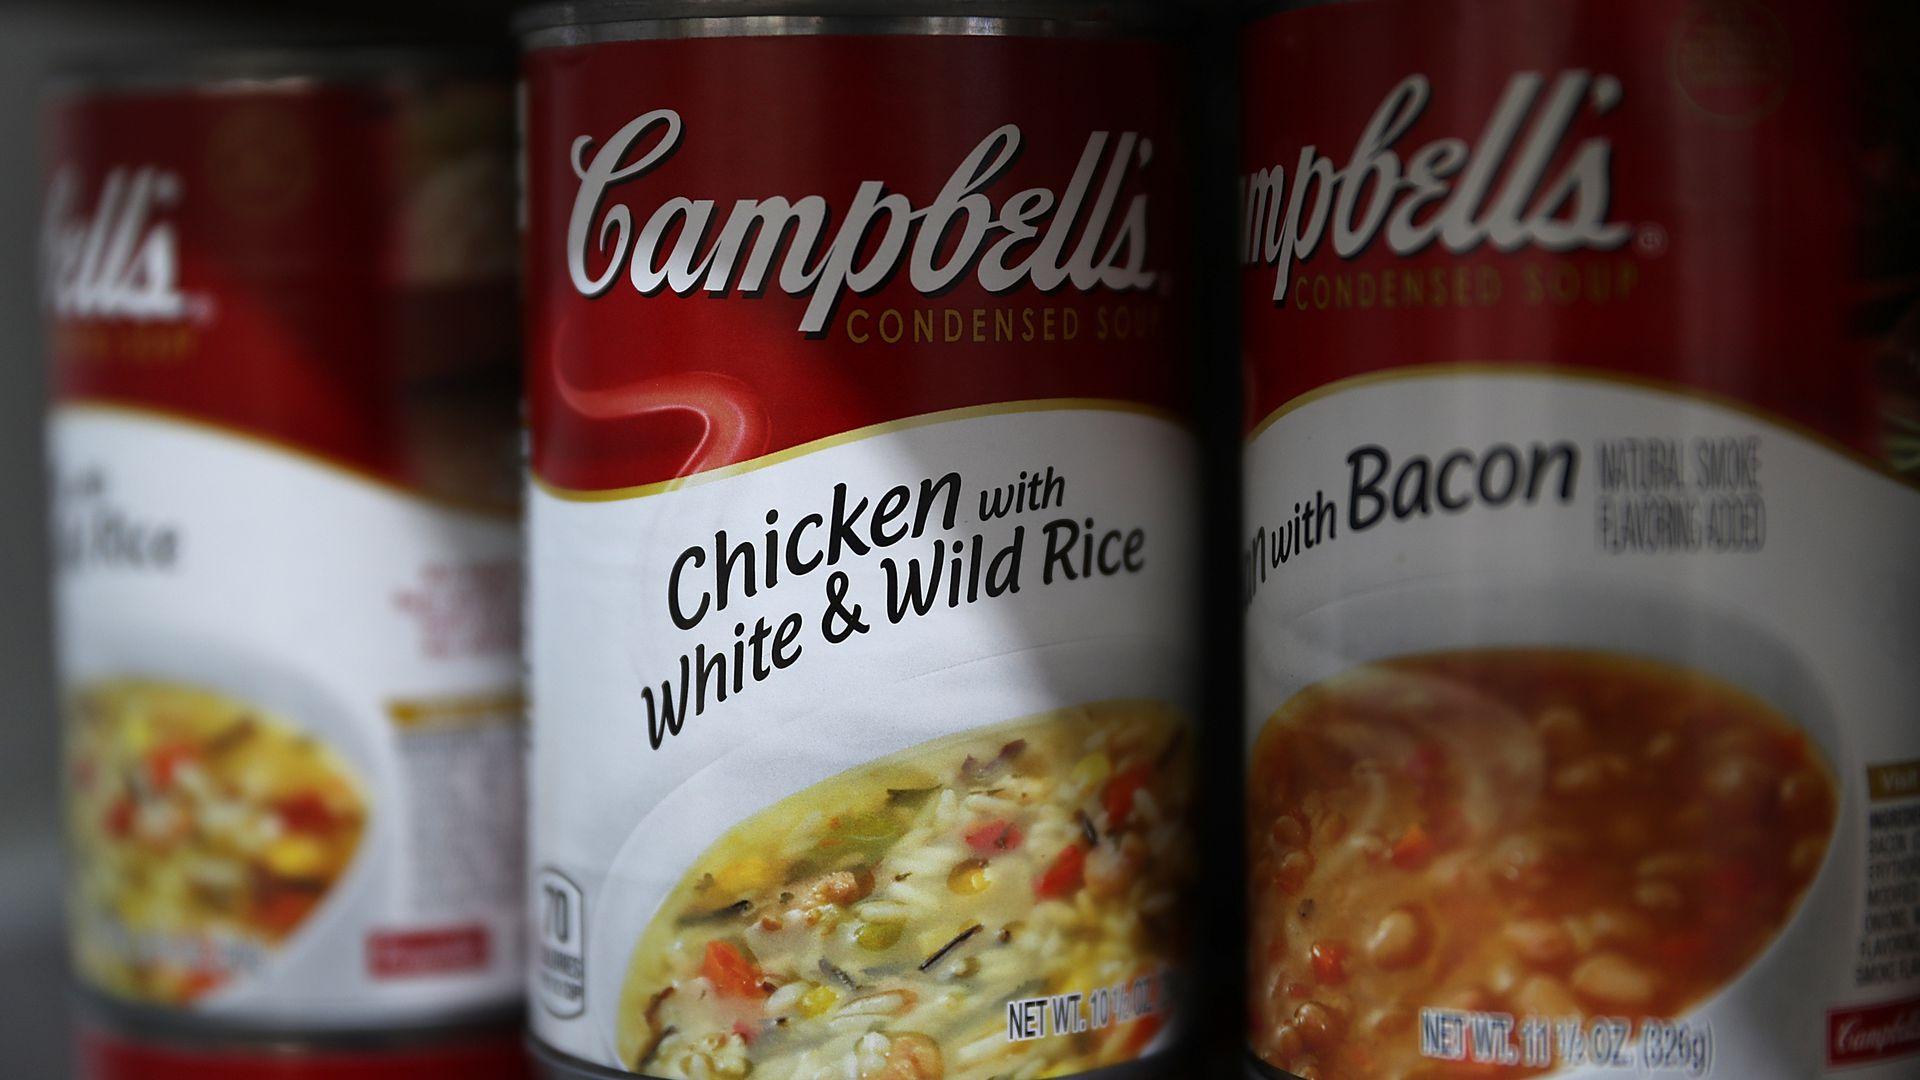 Campbell Soup announces plan to sell off brands in plan to